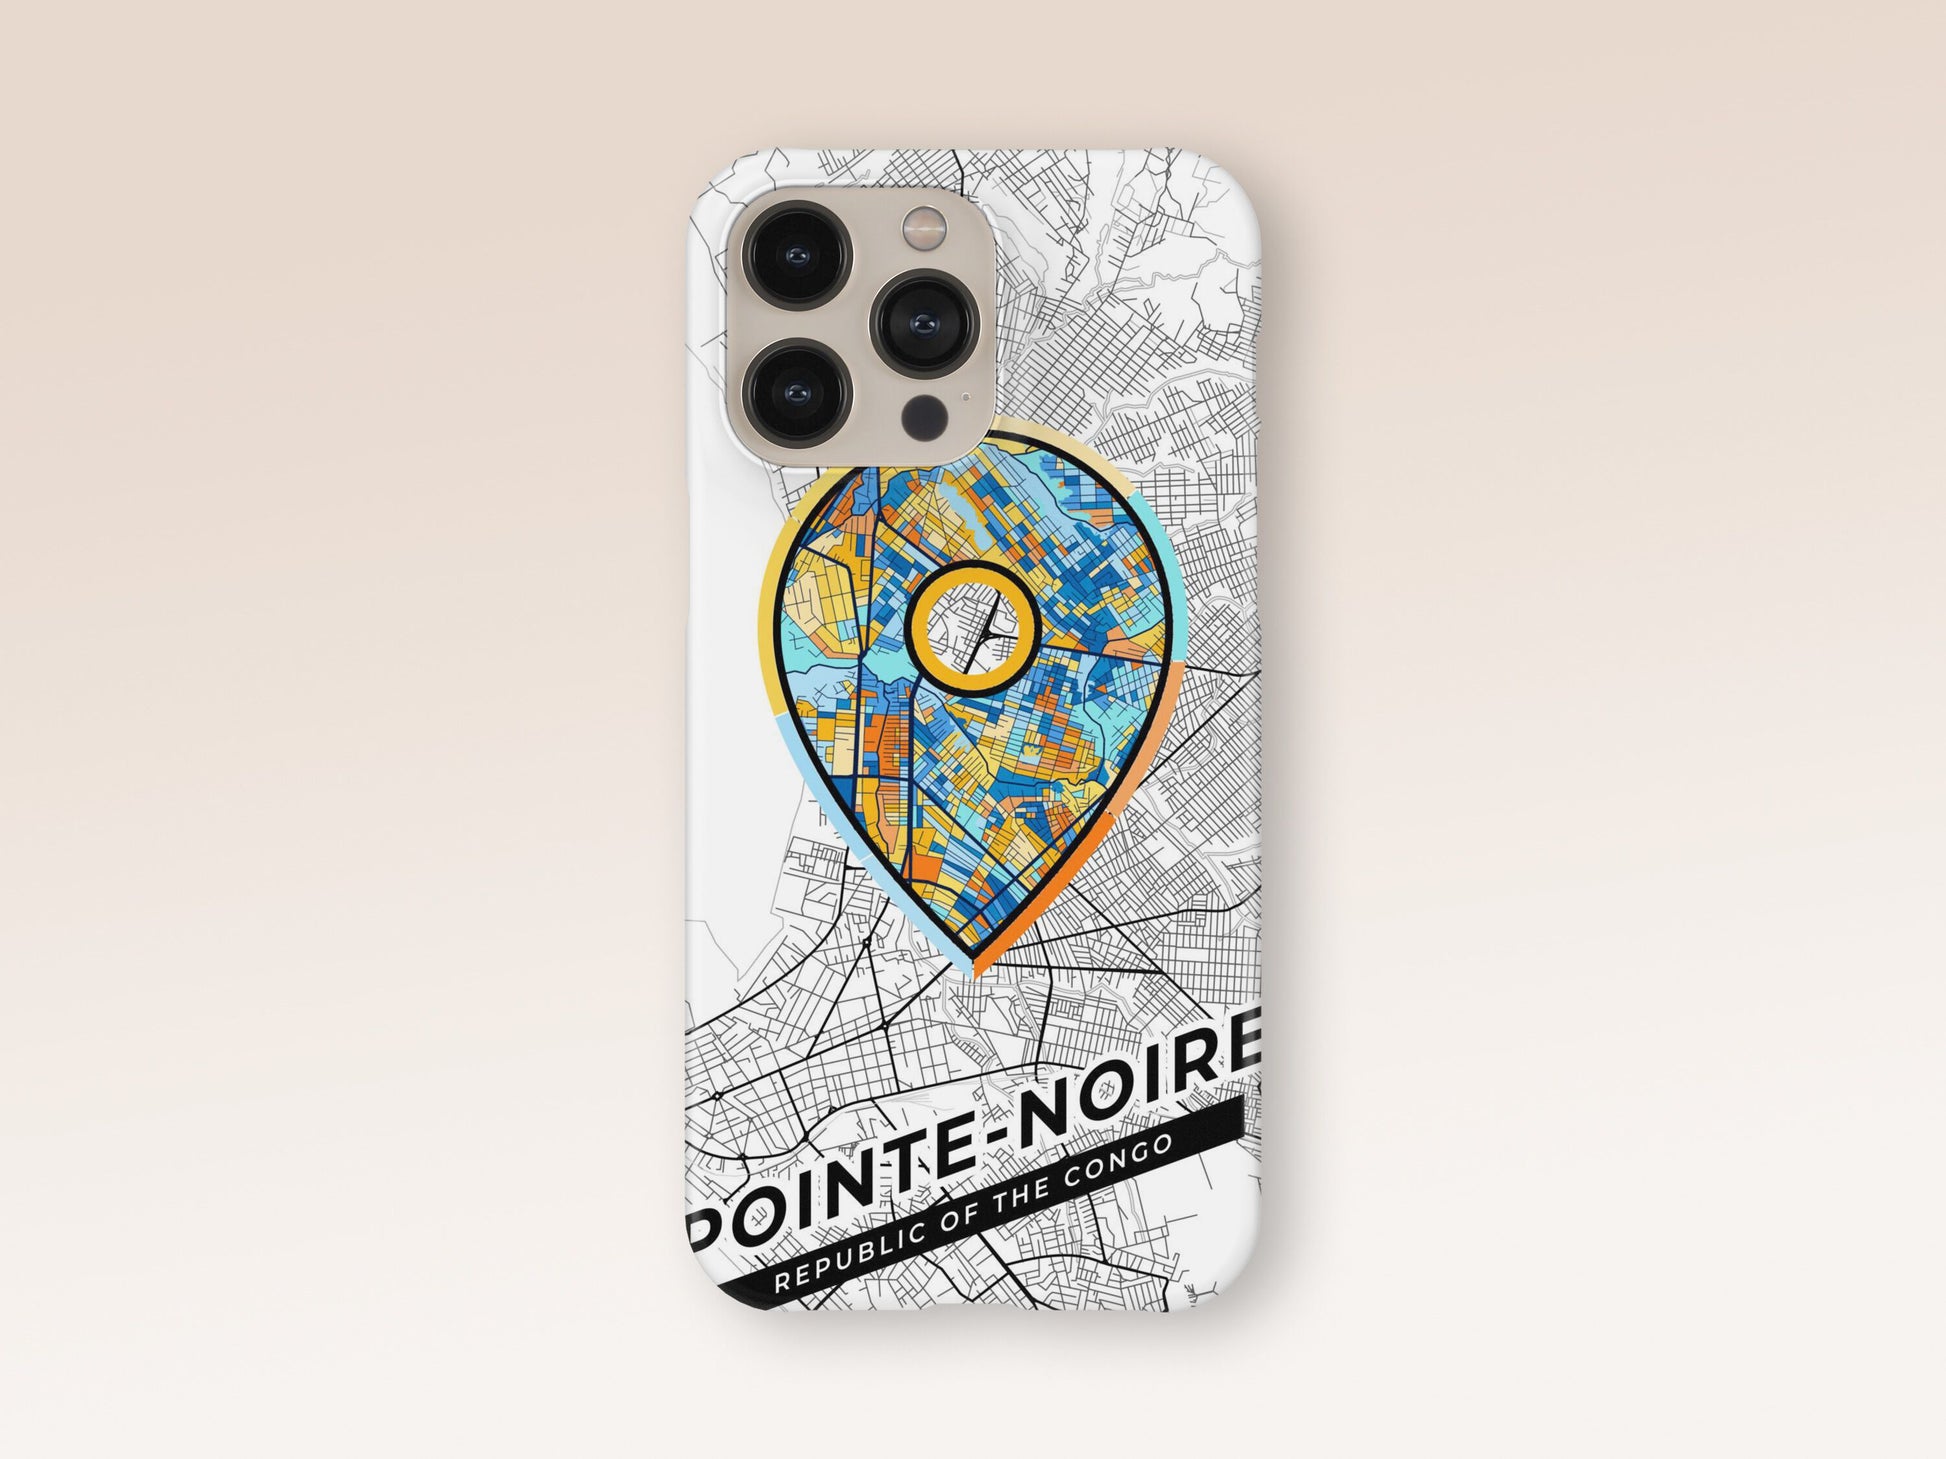 Pointe-Noire Republic Of The Congo slim phone case with colorful icon 1